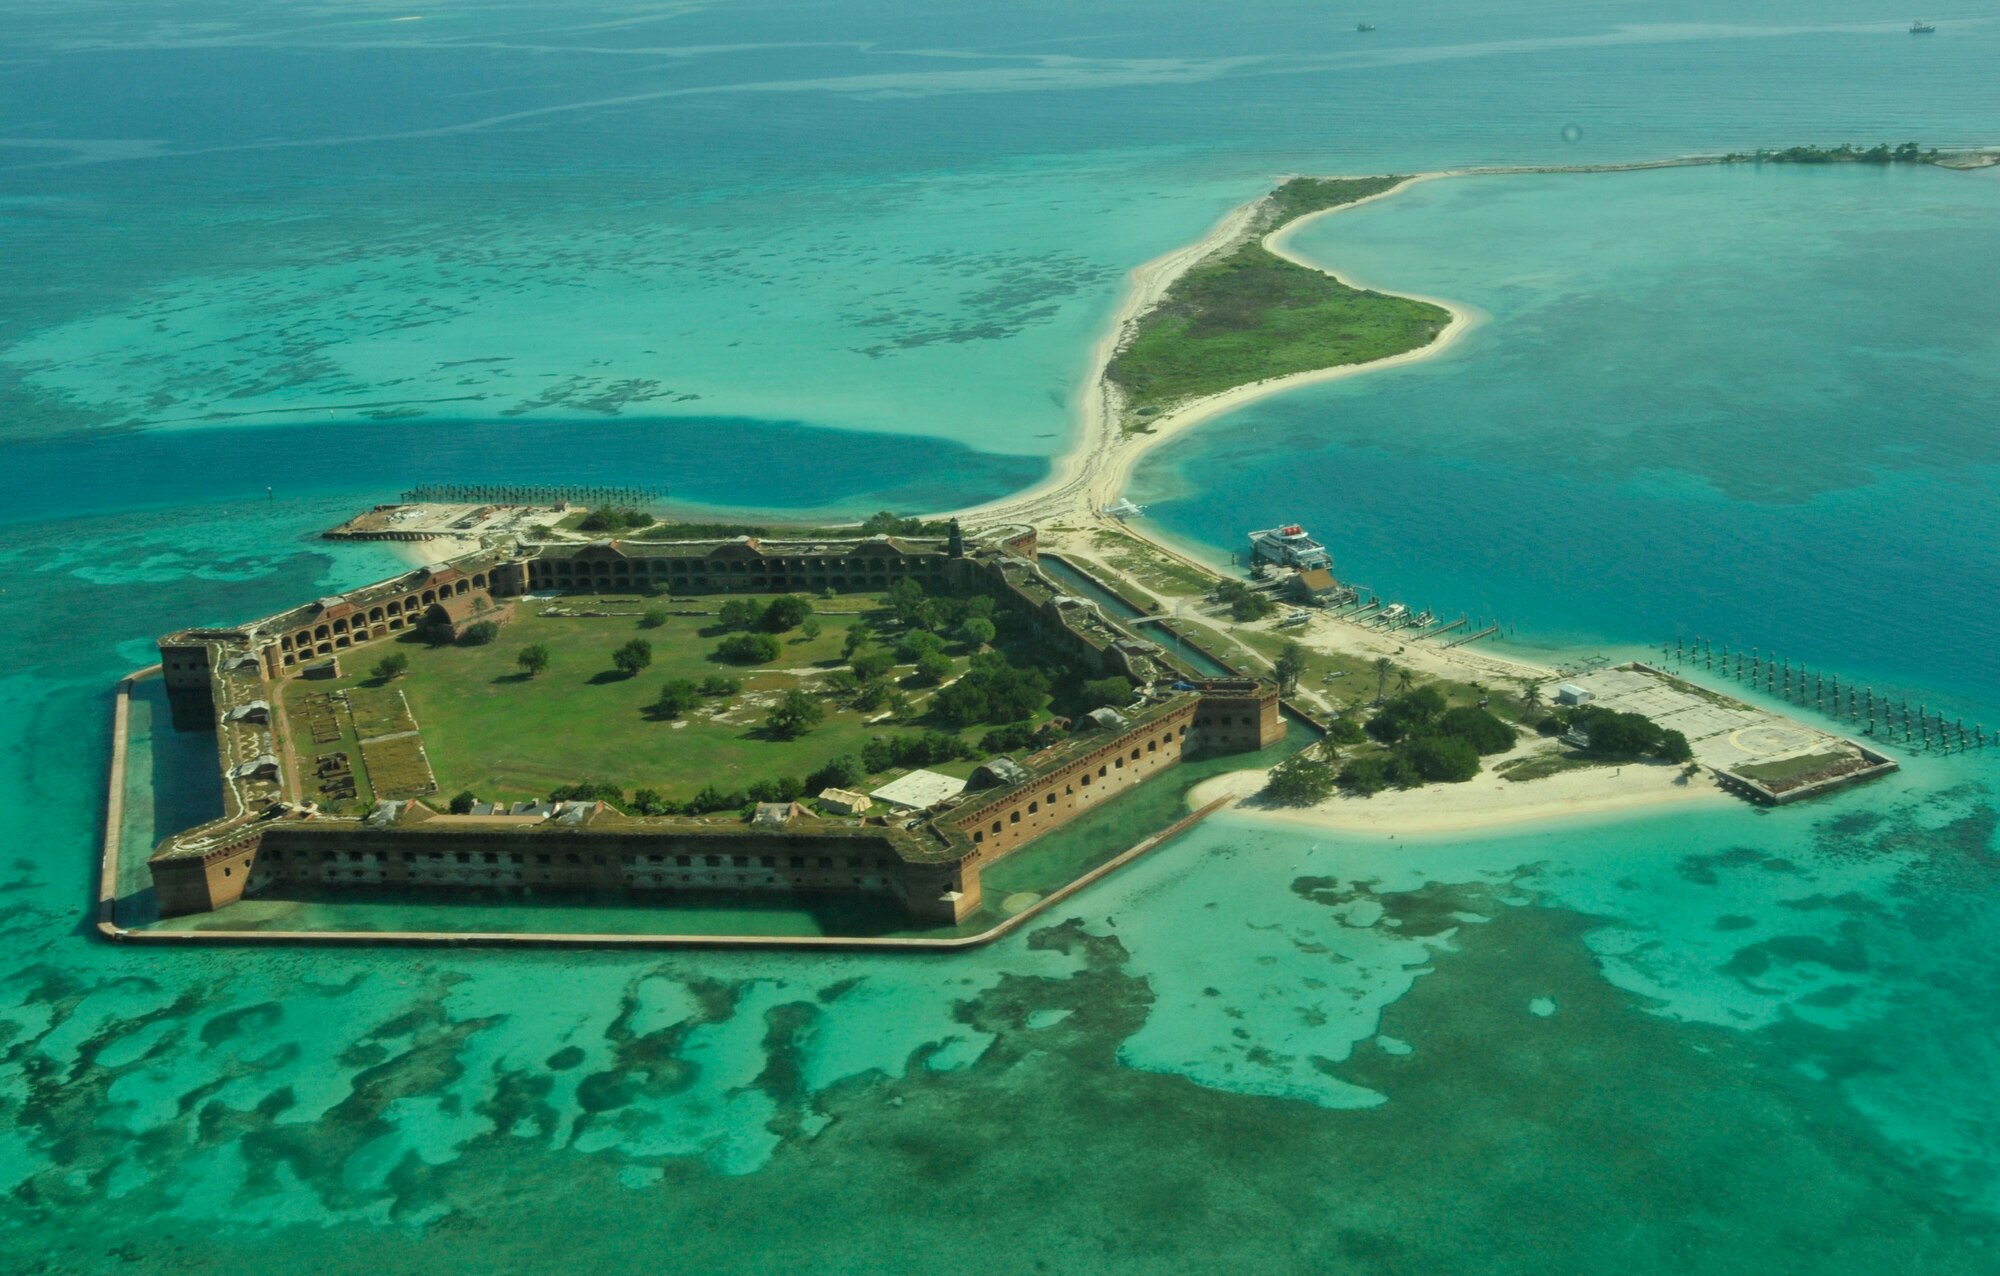 An aerial view of Fort Jefferson in the Dry Tortugas National Park Jan. 17. Air Force reservists both active and retired from Homestead Air Reserve Base’s 482nd Civil Engineer Squadron gathered at Fort Jefferson over several days in January to participate in a maintenance project for the National Park Service. 15 active reservists, six retired reservists, and one civilian contractor set up shop at Fort Jefferson as a training mission. The main project of the training was the construction of four reinforced concrete bases for large, 24-ton restored cannons to replicate the historical weapon's footprint. (U.S. Air Force photo/Ross Tweten)